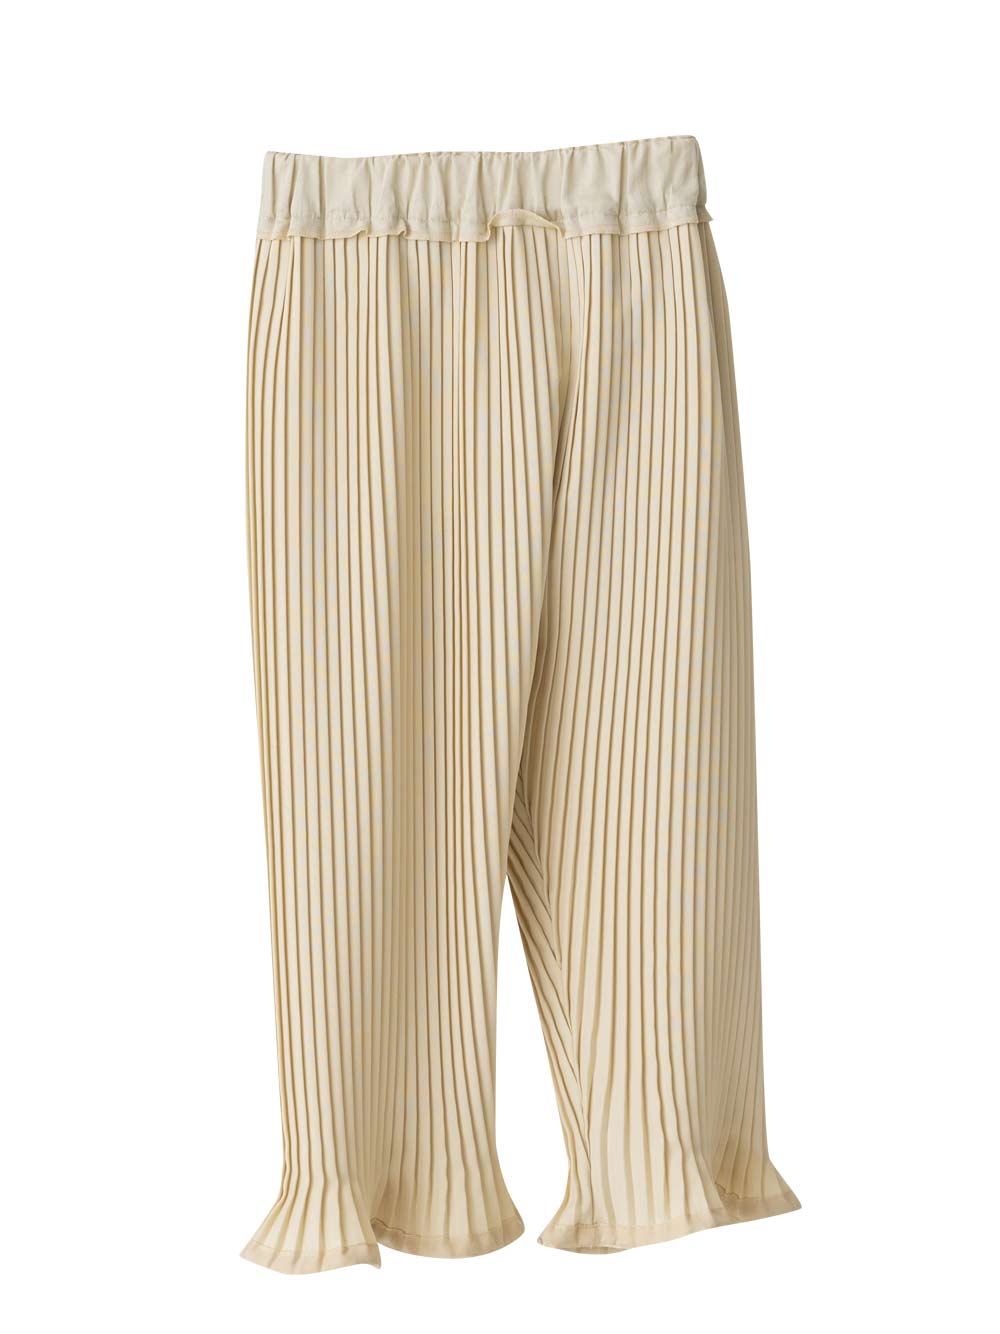 PREORDER: Micropleated Pants